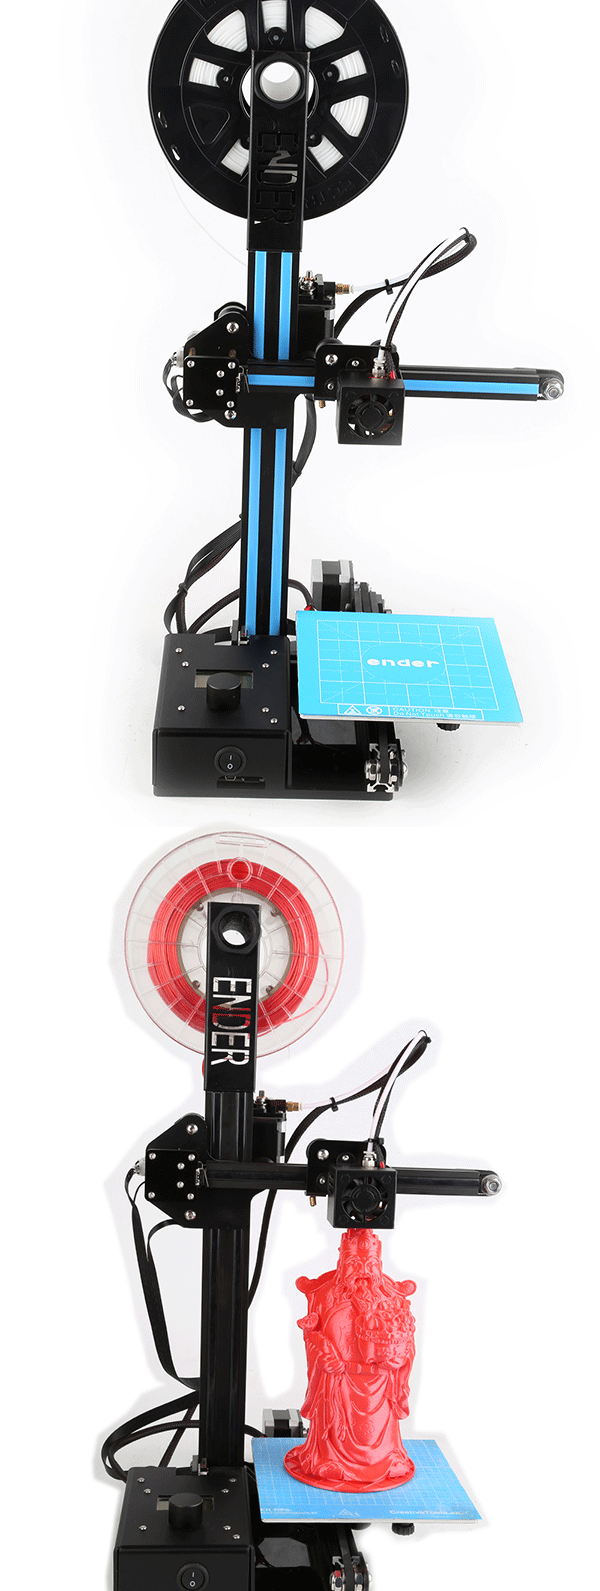 Creality 3D® Ender-2 DIY 3D Printer Kit 150*150*200mm Printing Size With Auto Leveling 1.75mm 0.4mm Nozzle 13